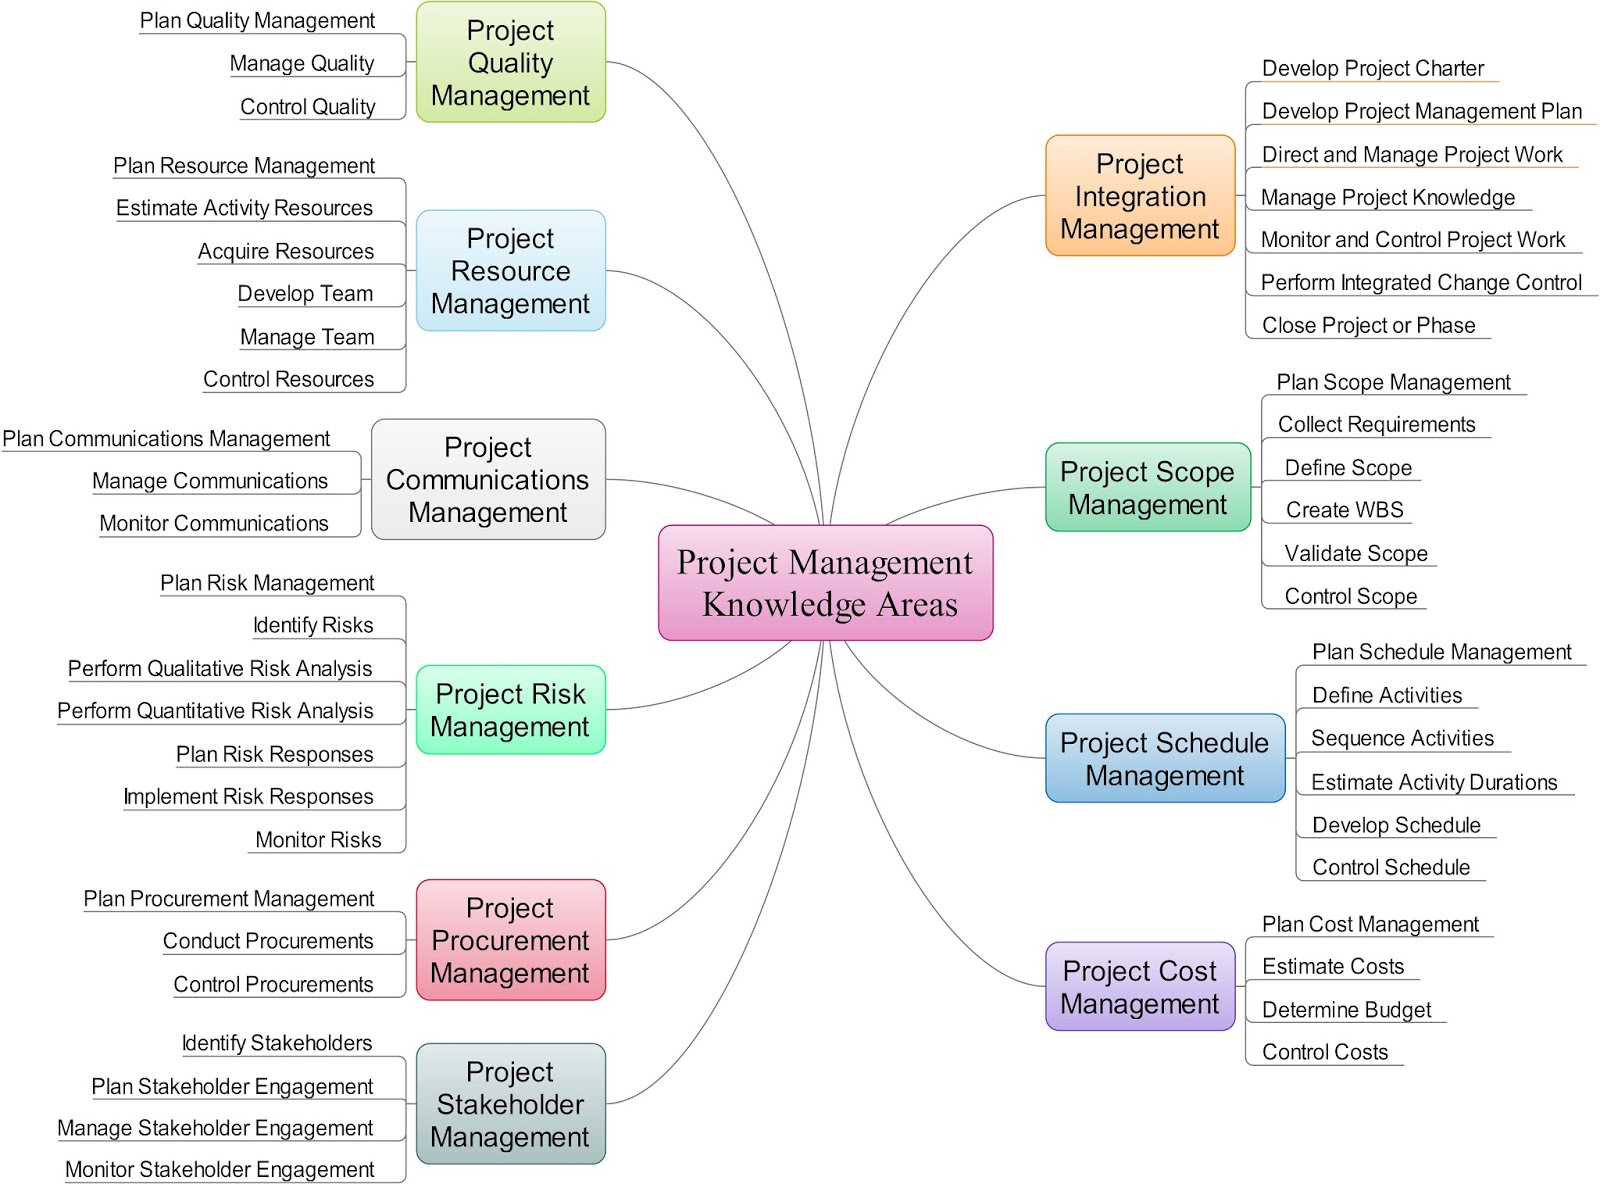 How to Study Project Management Professional PMP?: Mind Mapping for